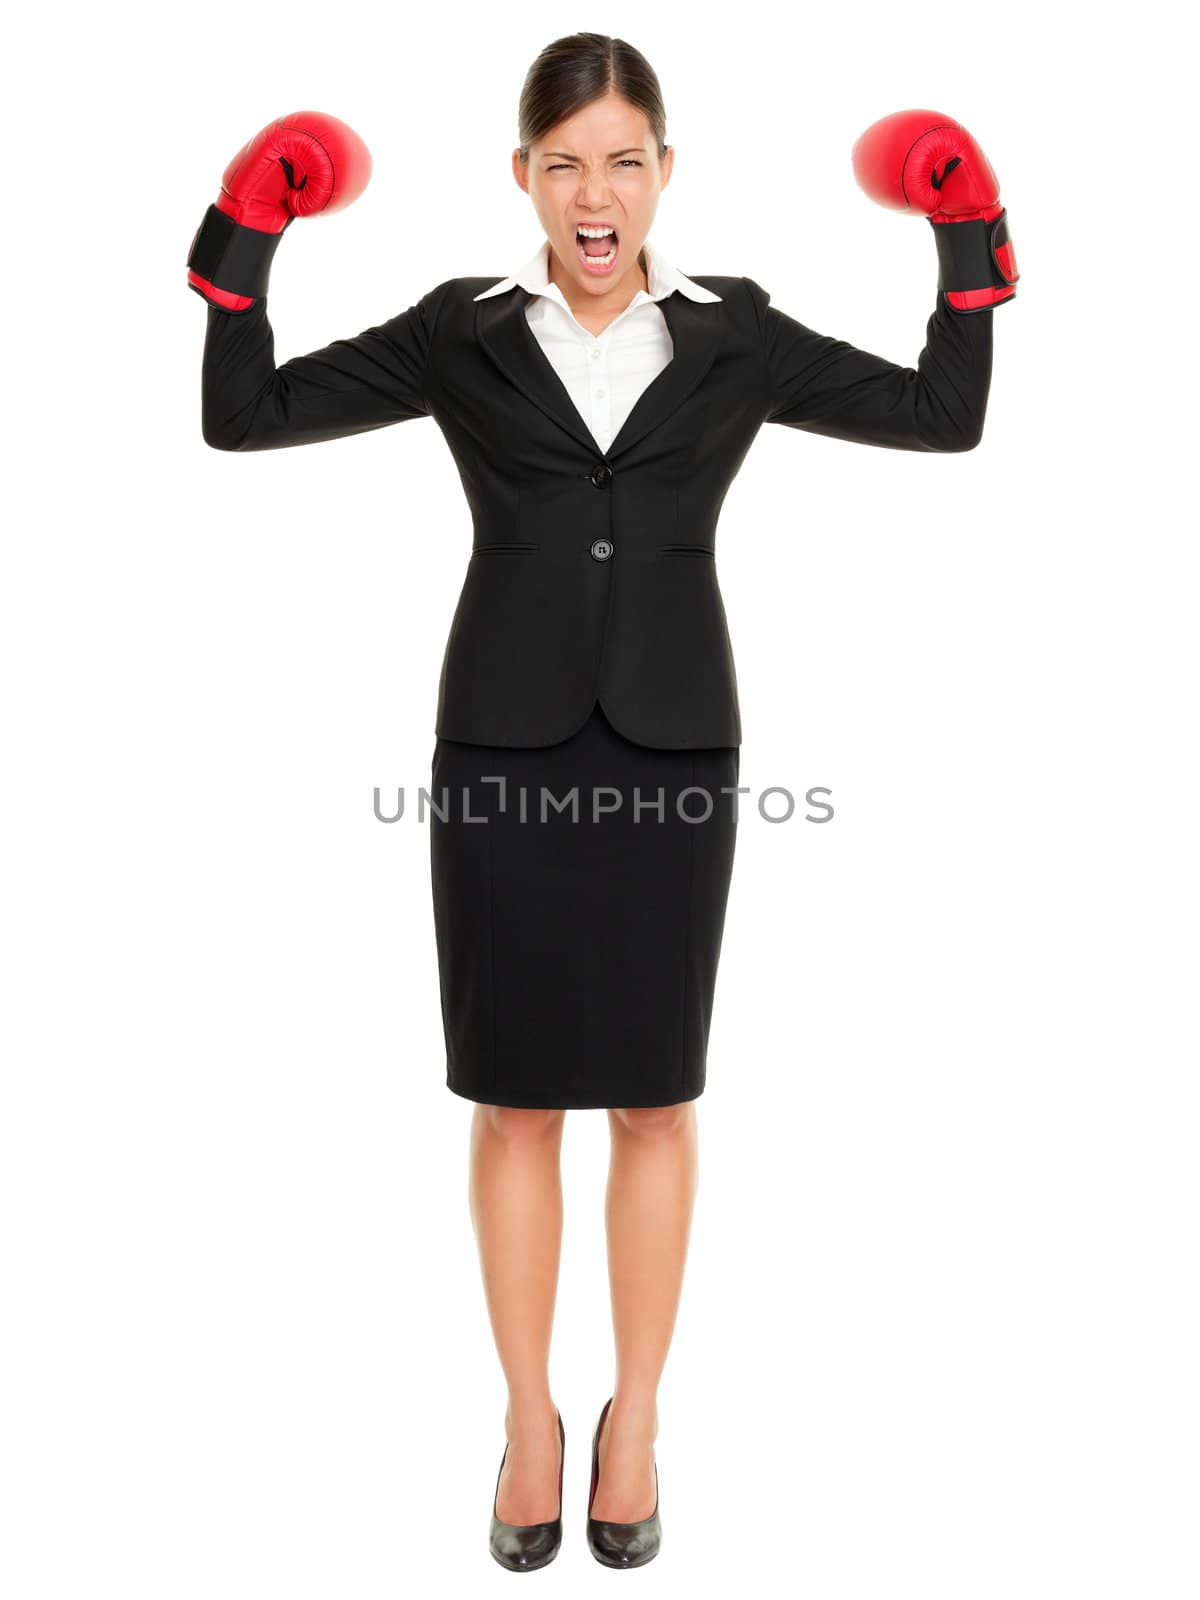 Strong aggressive business winner woman concept. Businesswoman wearing boxing gloves showing flexing muscles standing in full length wearing suit. Caucasian Asian female model isolated on white background.